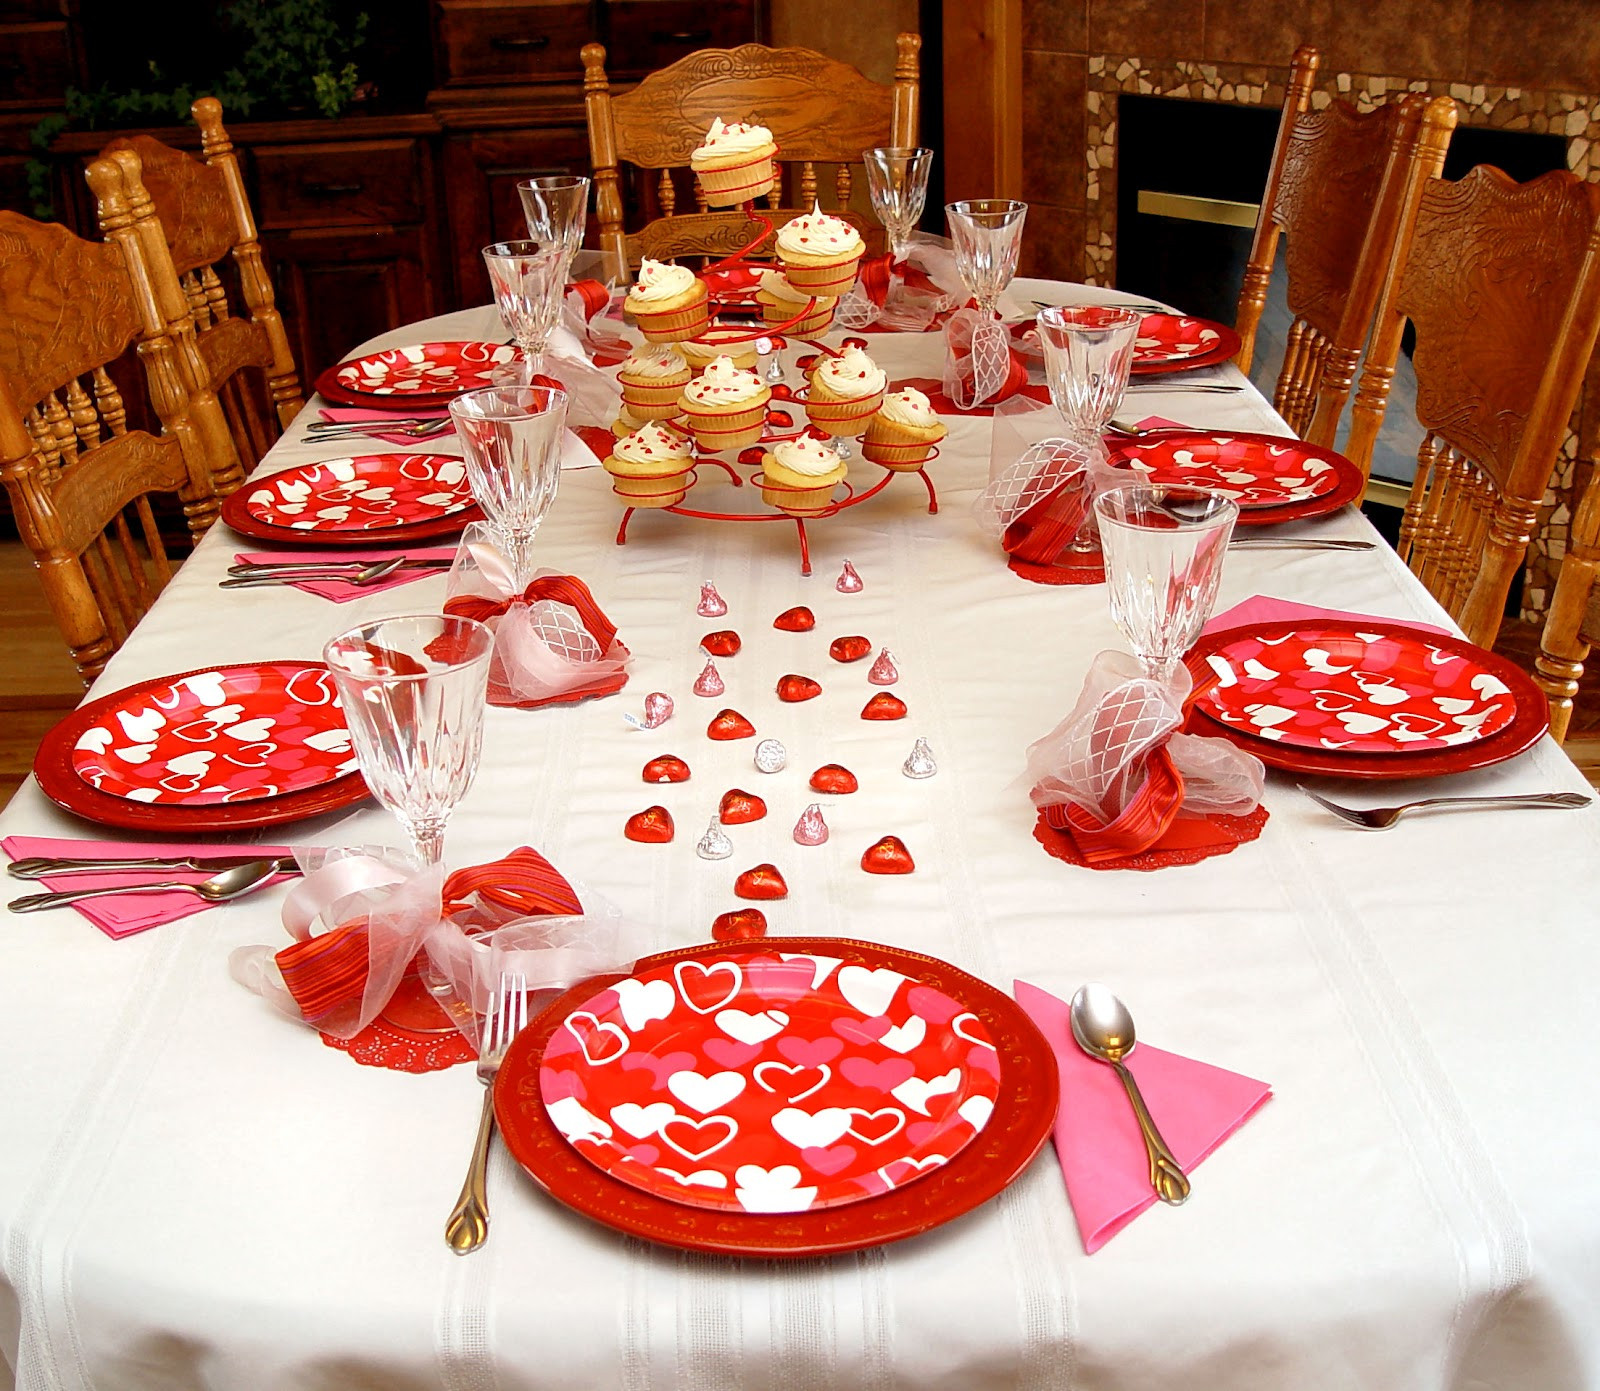 Valentines Dinner for Kids Lovely Family Valentines Dinner Idea and How to Make A Junk Bow